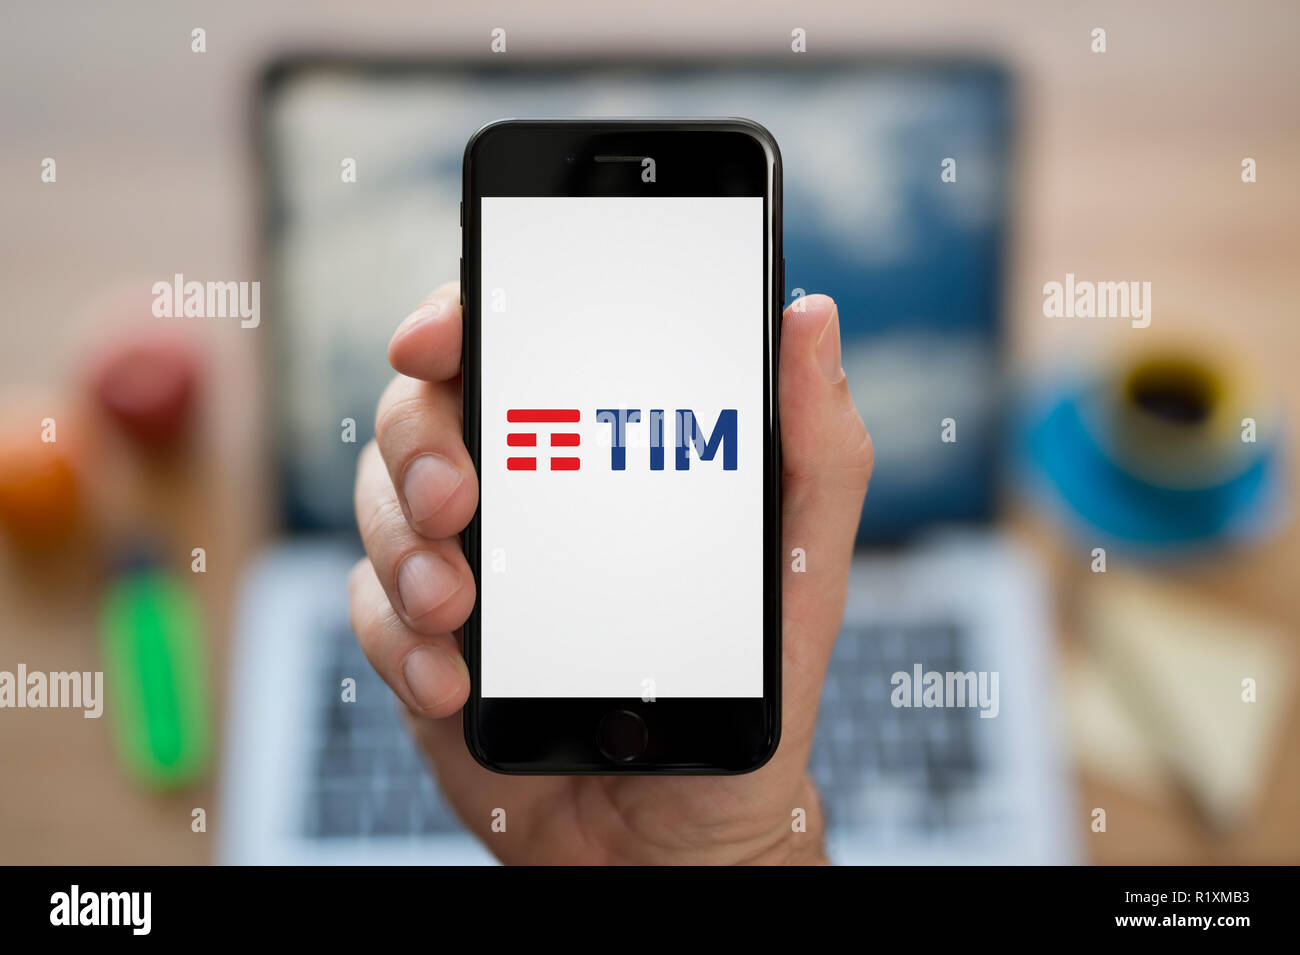 A man looks at his iPhone which displays the TIM logo, while sat at his computer desk (Editorial use only). Stock Photo